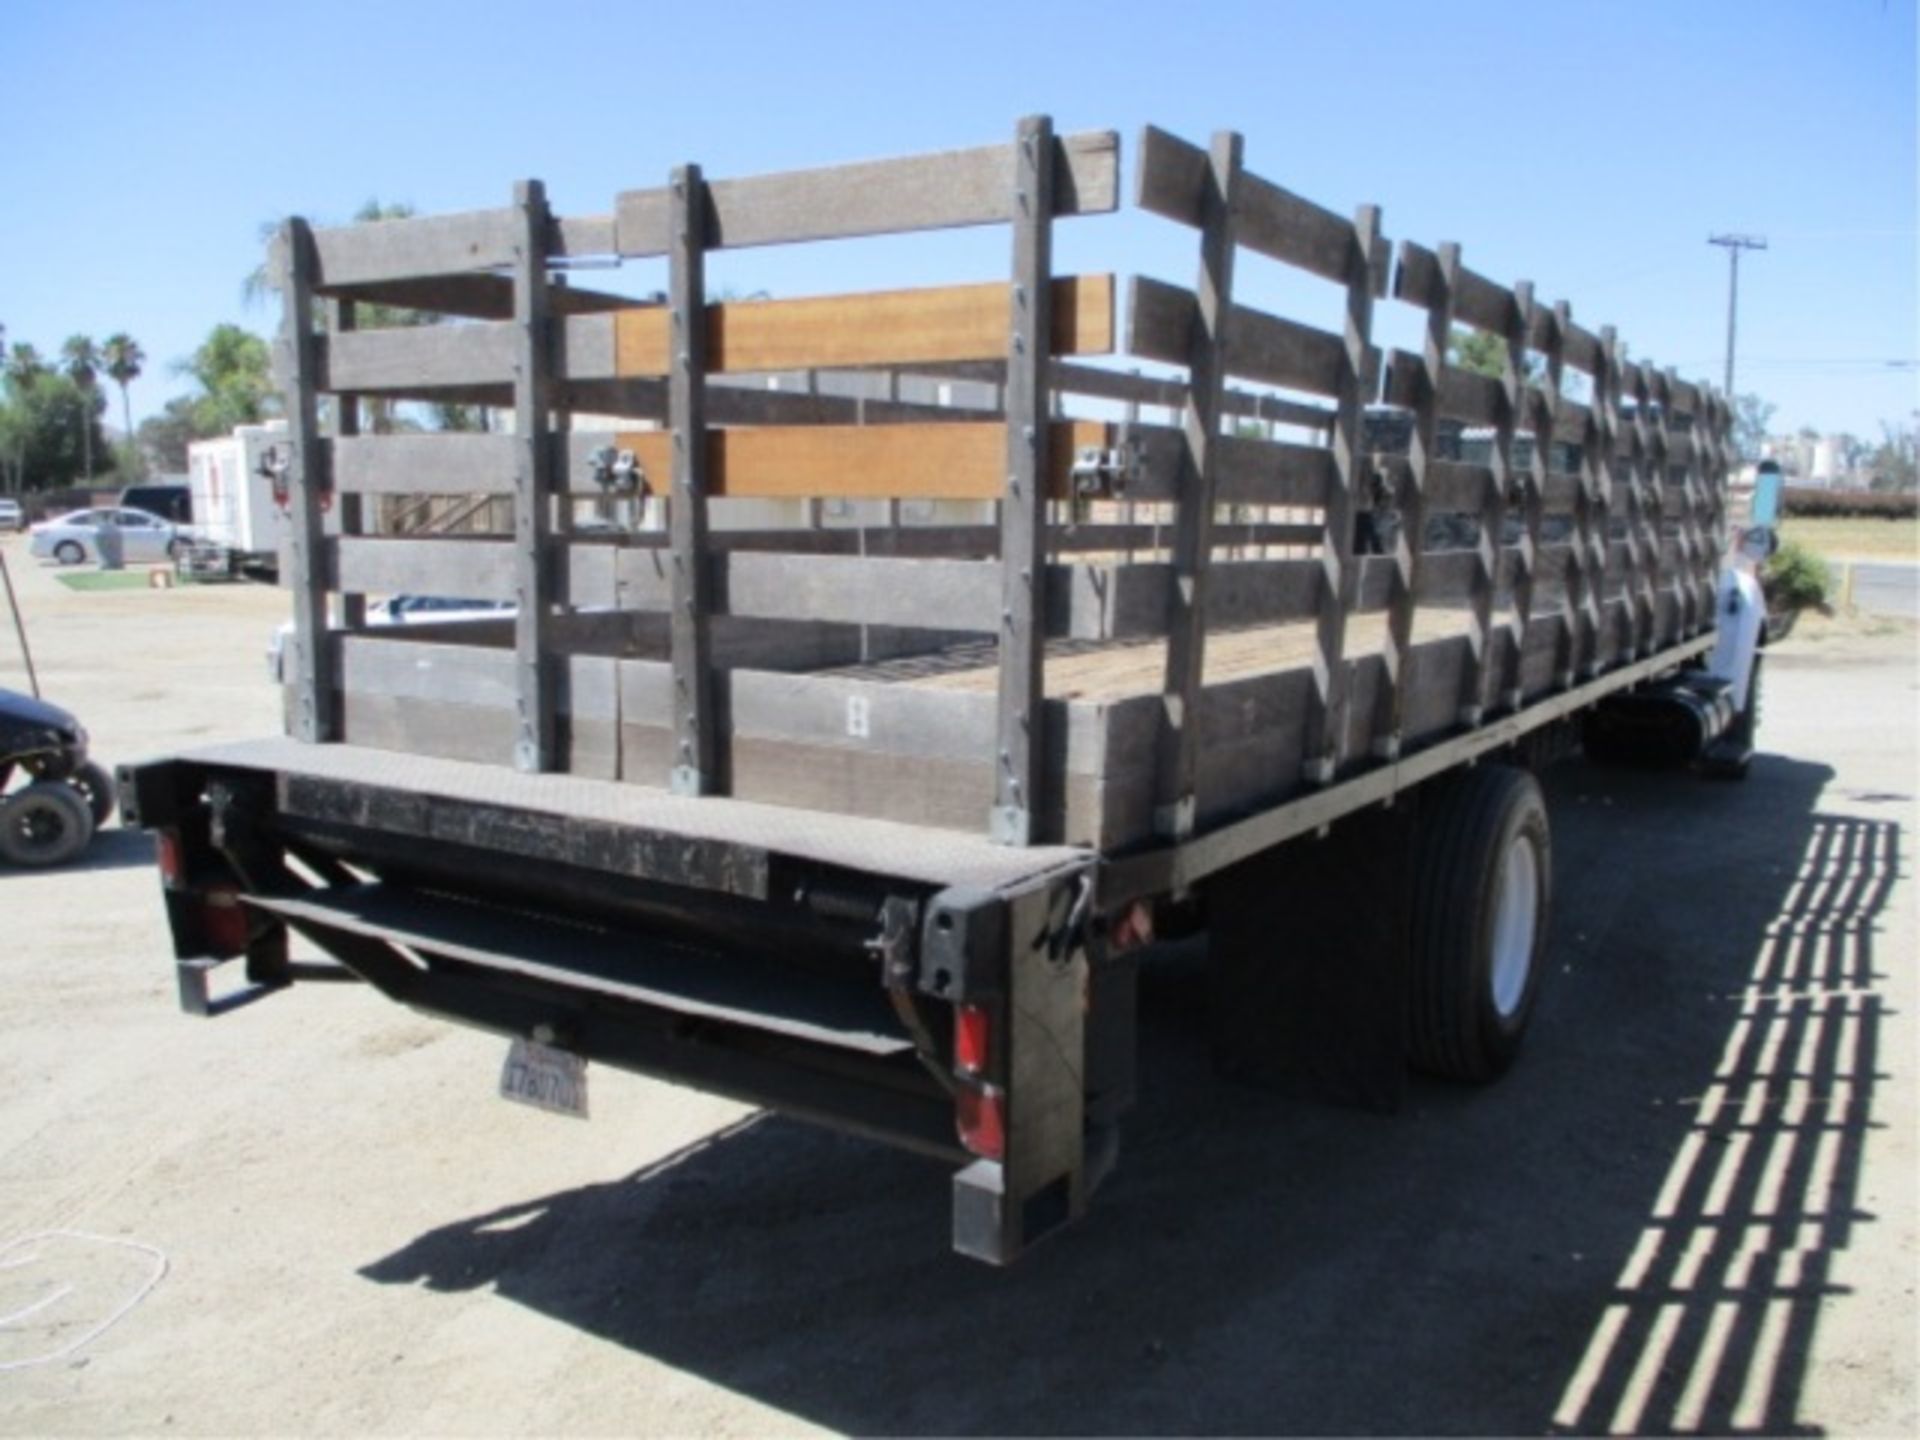 2005 Ford F650 S/A Flatbed Stakebed Truck, Cat C7 Acert 7.2L 6-Cyl Diesel, Automatic, Lift Gate, 24' - Image 16 of 61